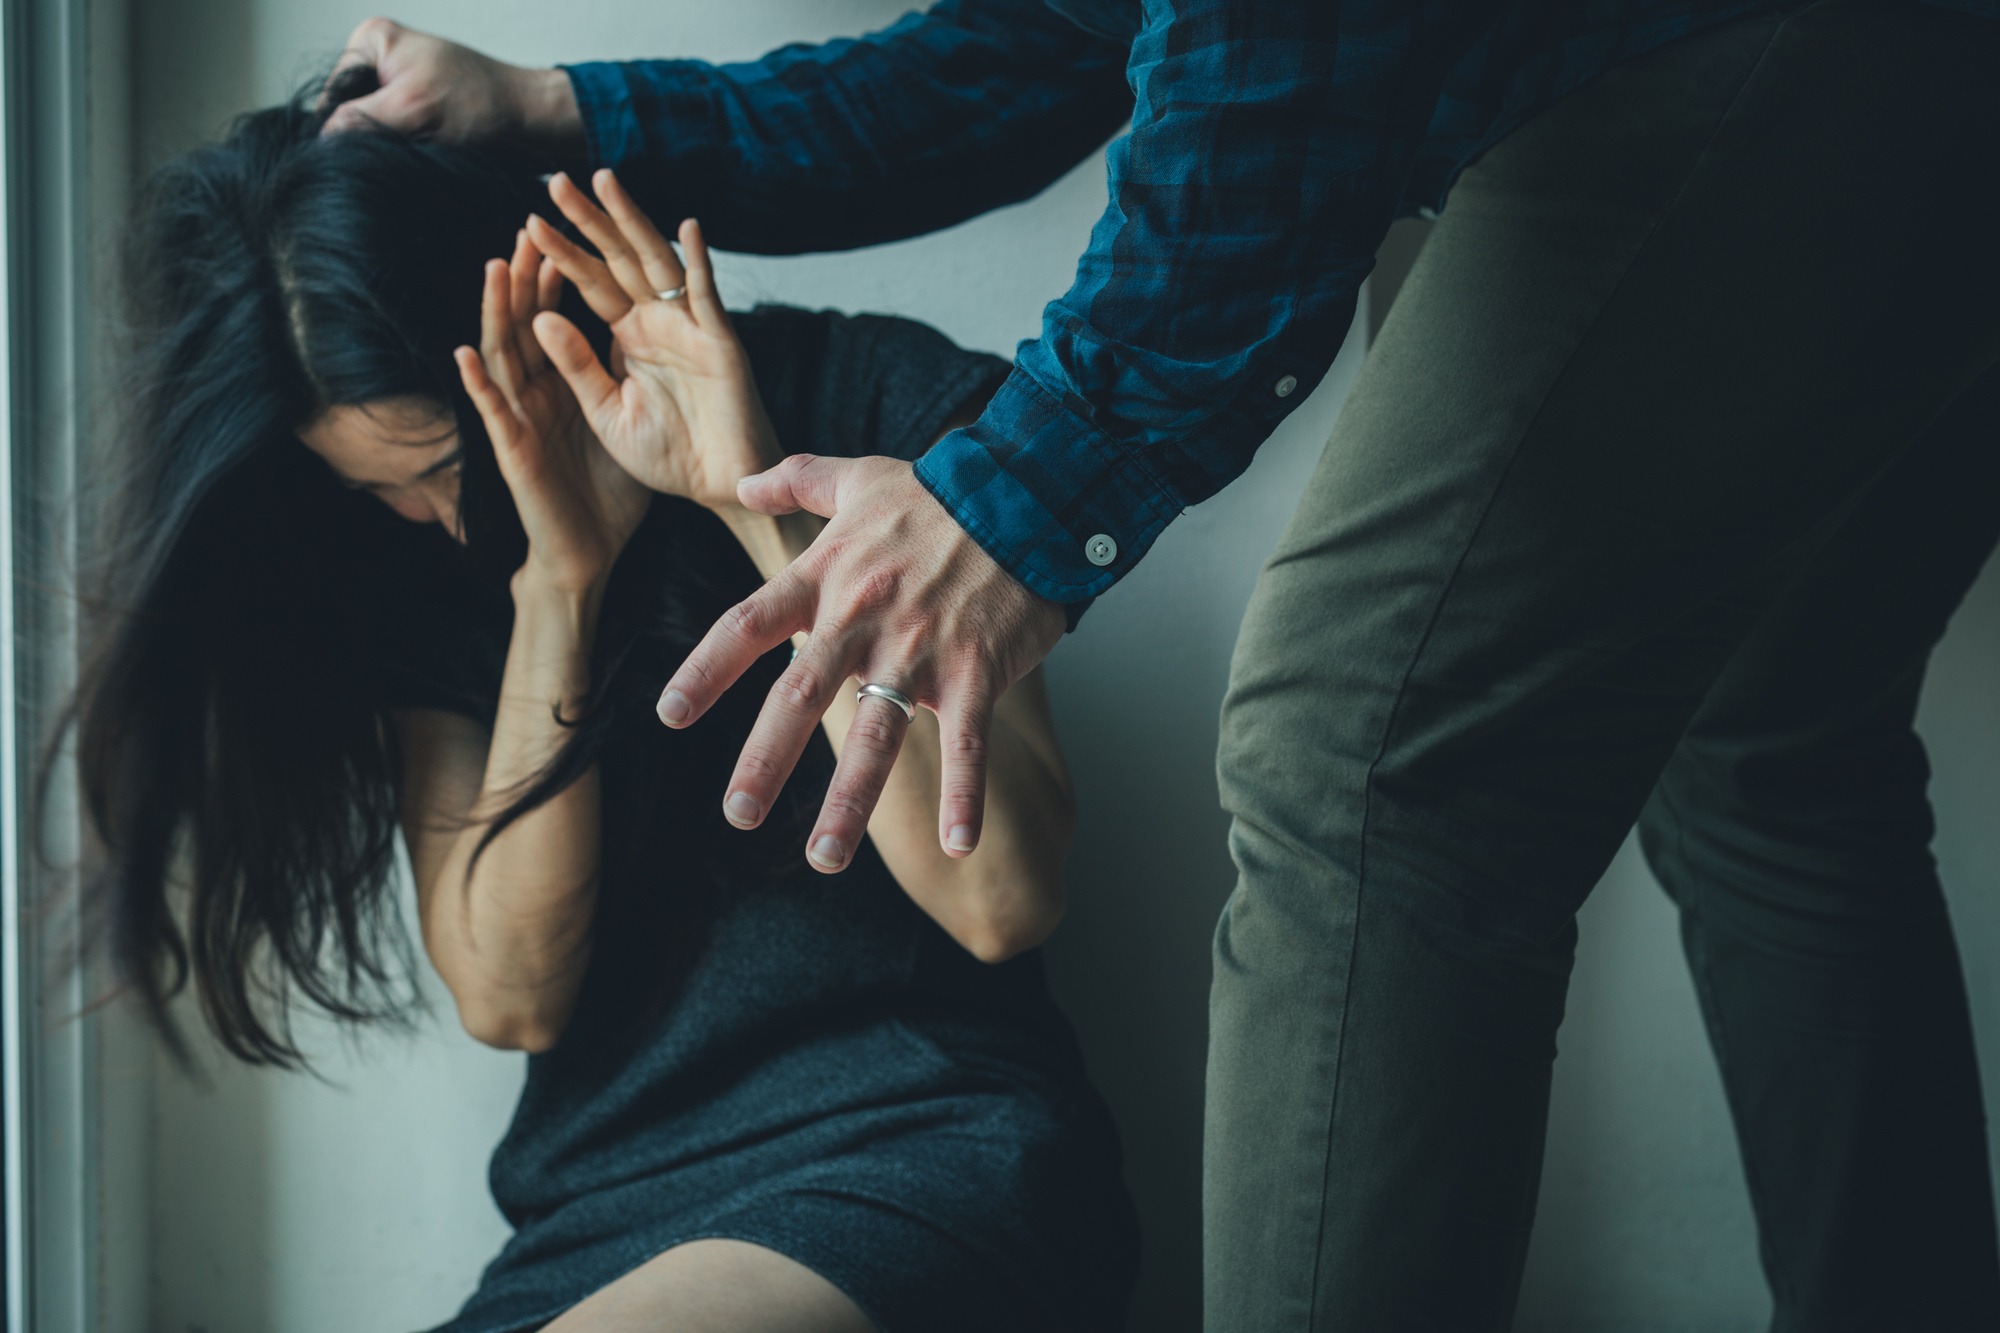 Safety Planning Tips For Those In Abusive Relationships